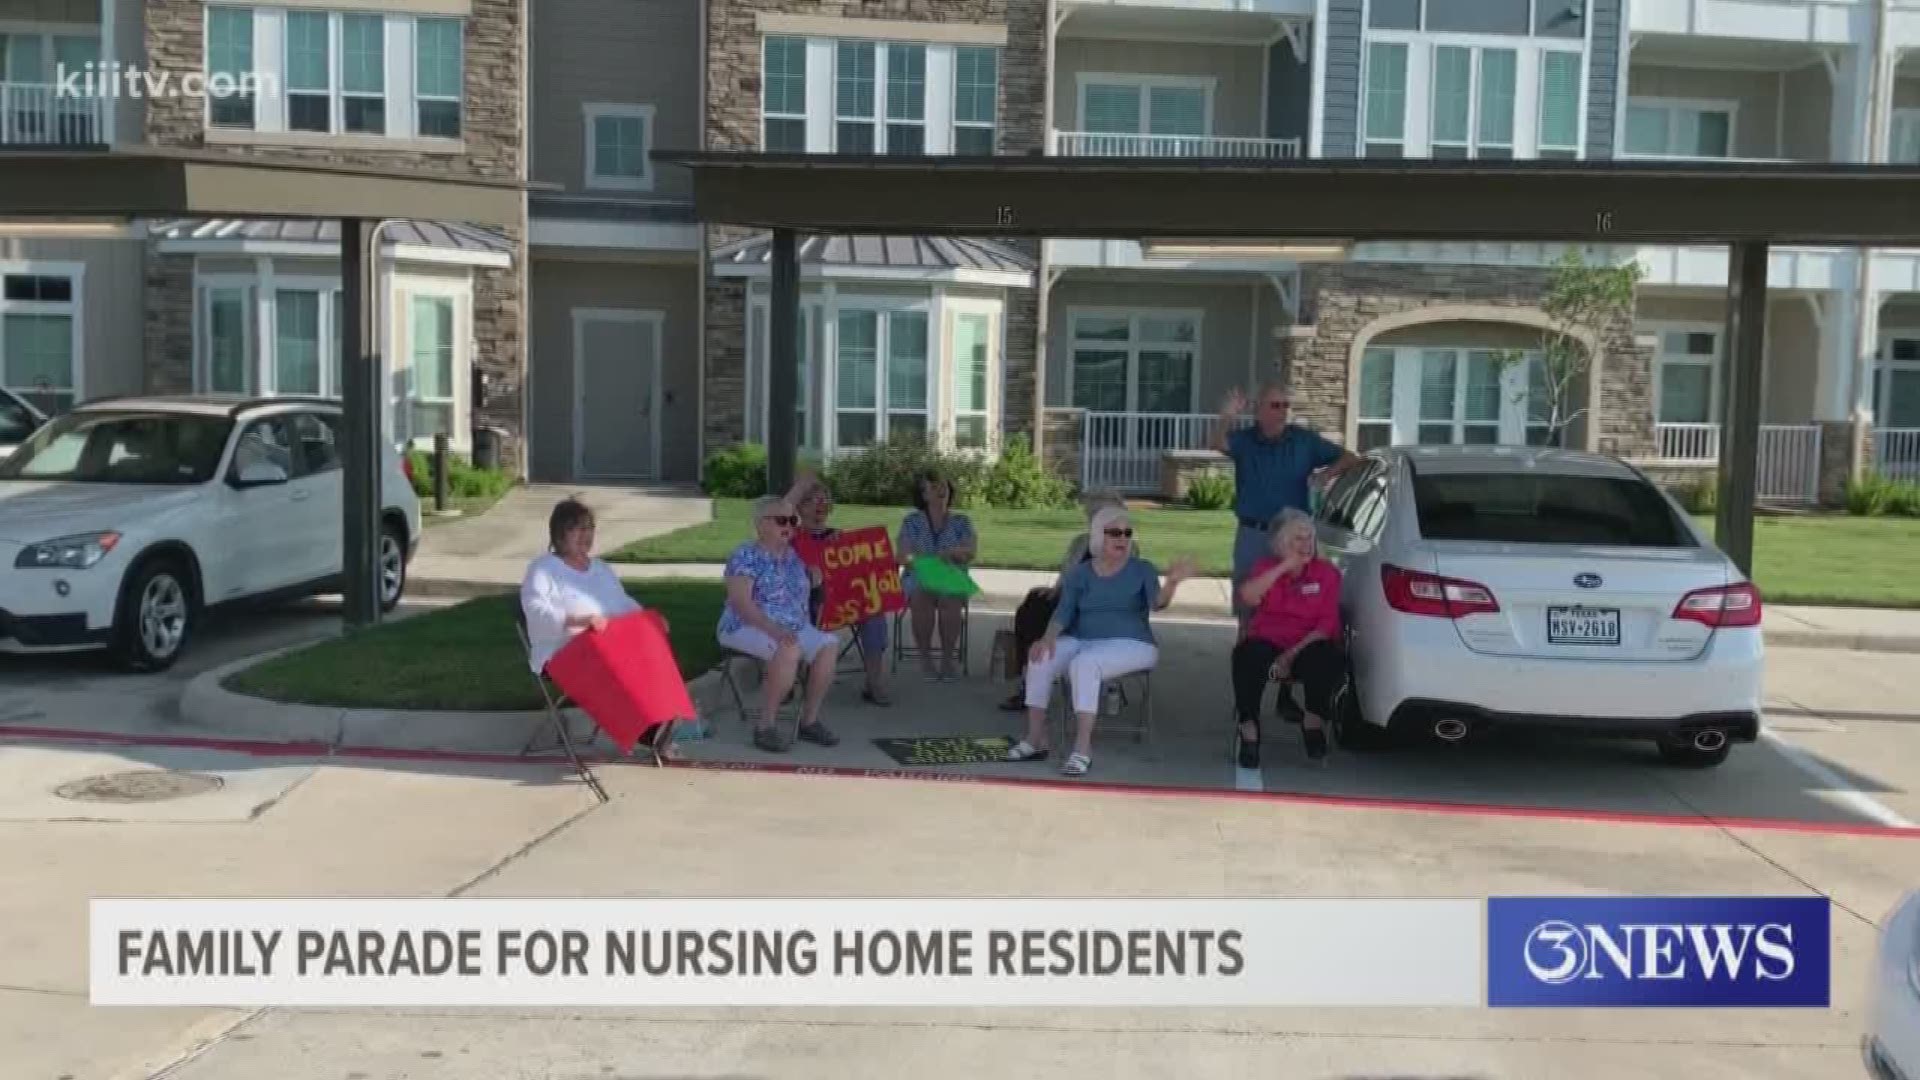 Residents at the Senior Living Center were in for a special surprise today.